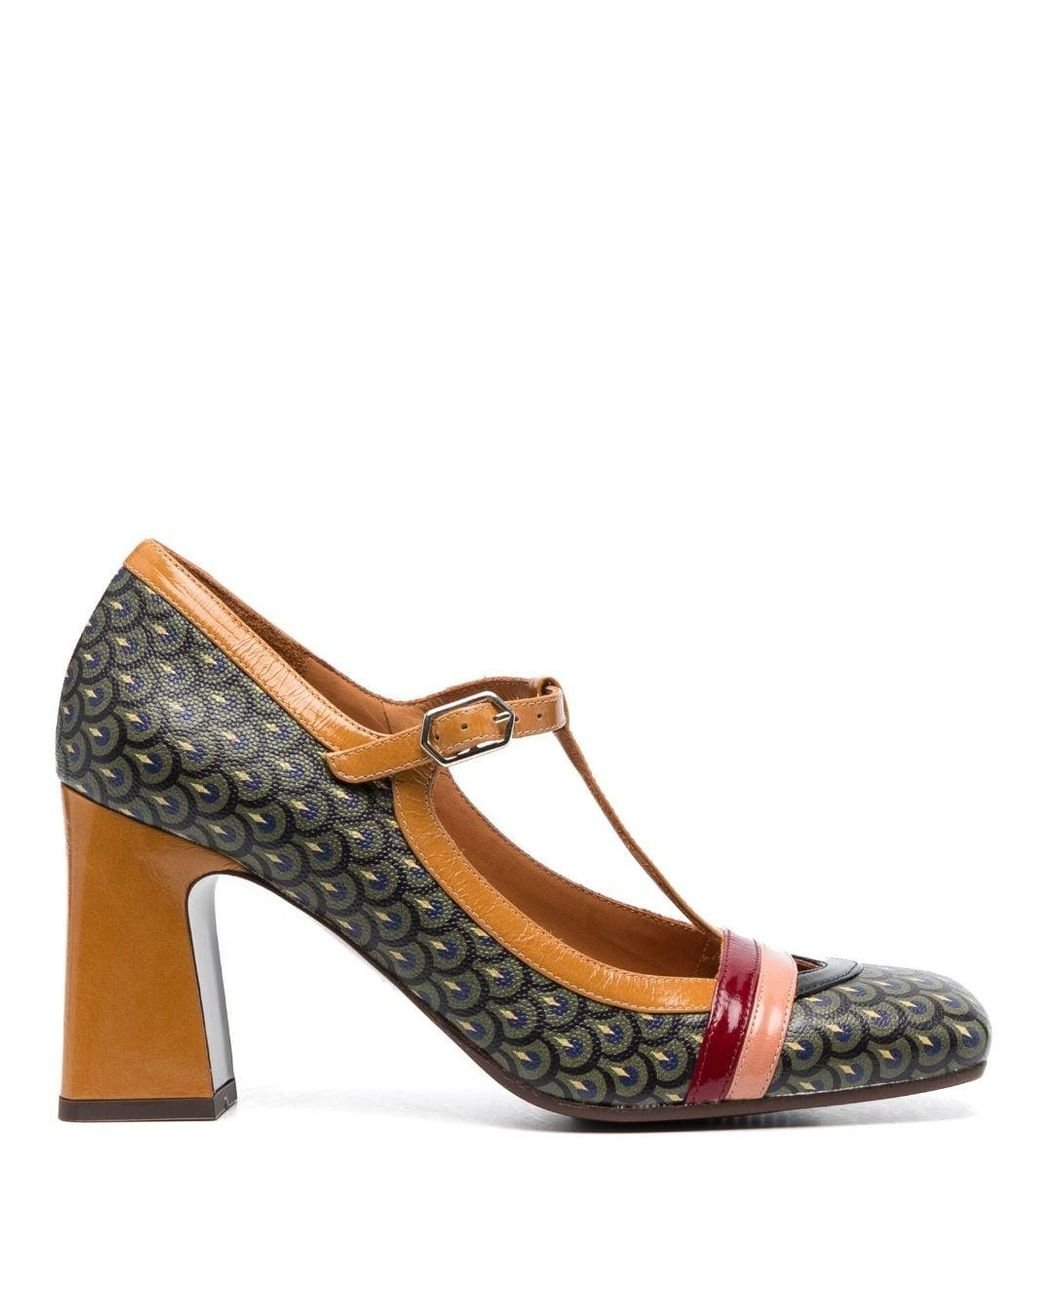 Chie Mihara Odaina 90mm Square-toe Pumps in Brown | Lyst